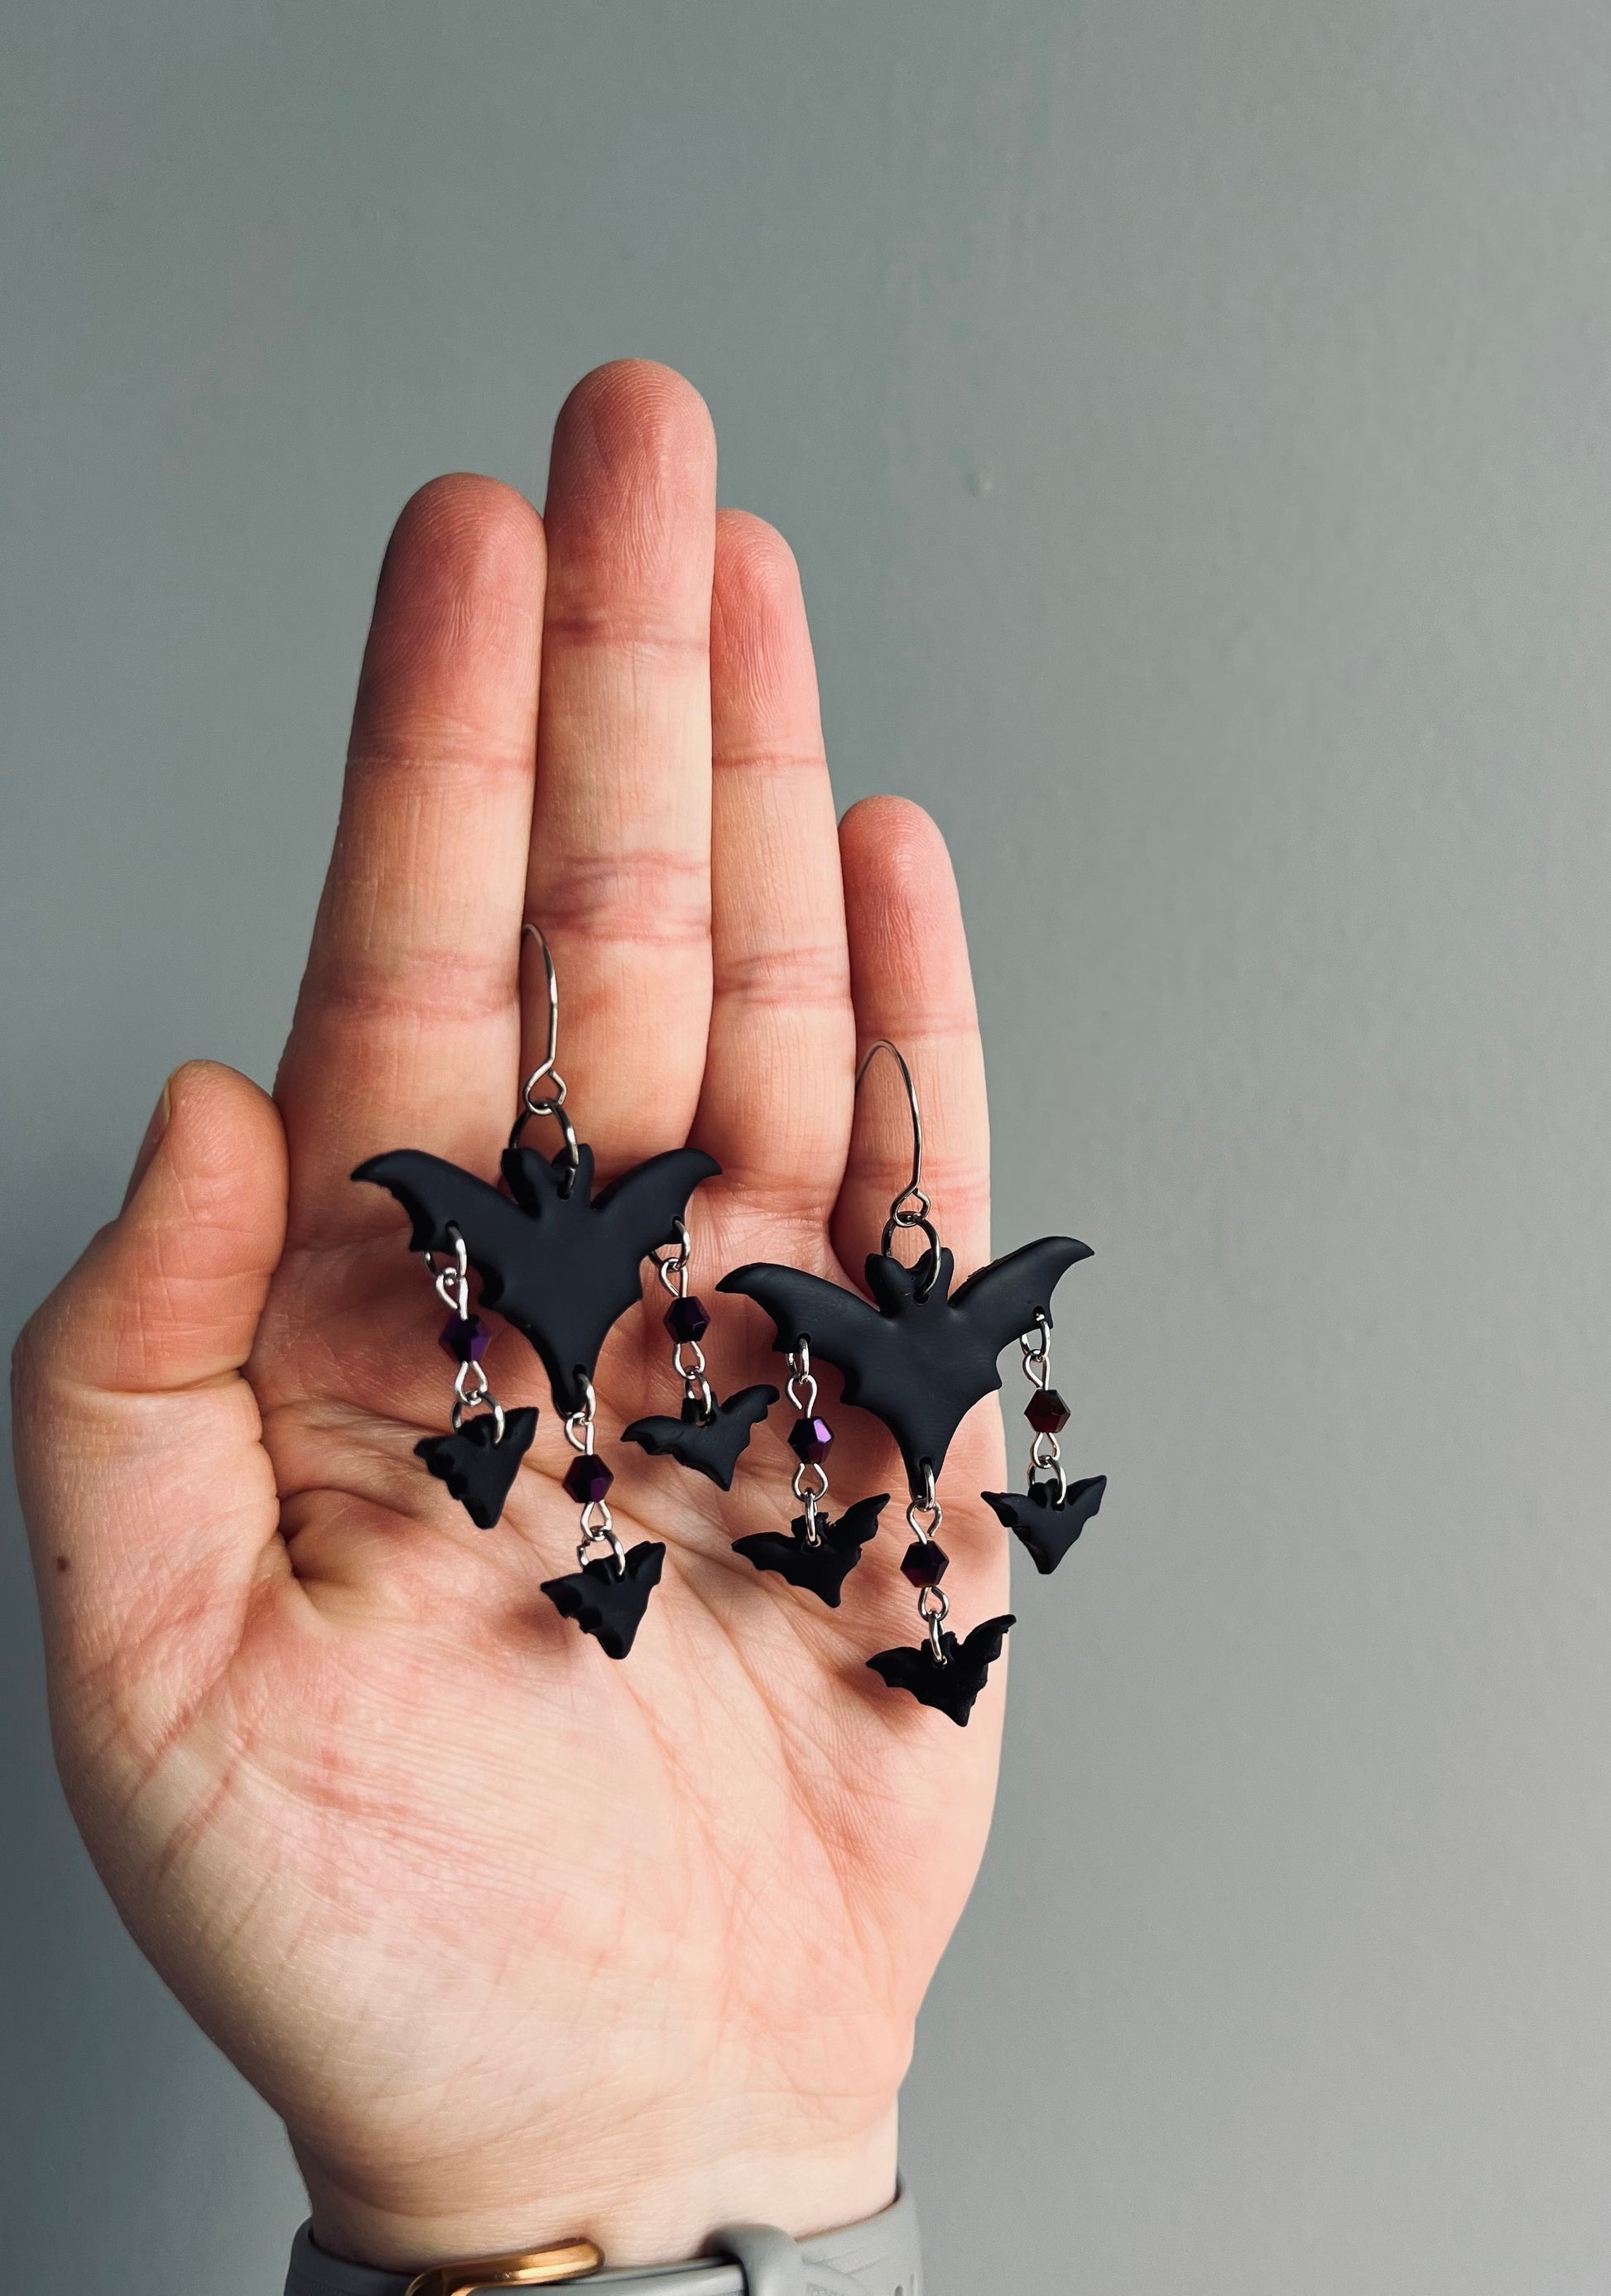 Fly into the night with our black bat earrings, soaring against the dark sky. These striking accessories embody the mystique of the nocturnal world, perfect for adding a touch of gothic charm to any ensemble.